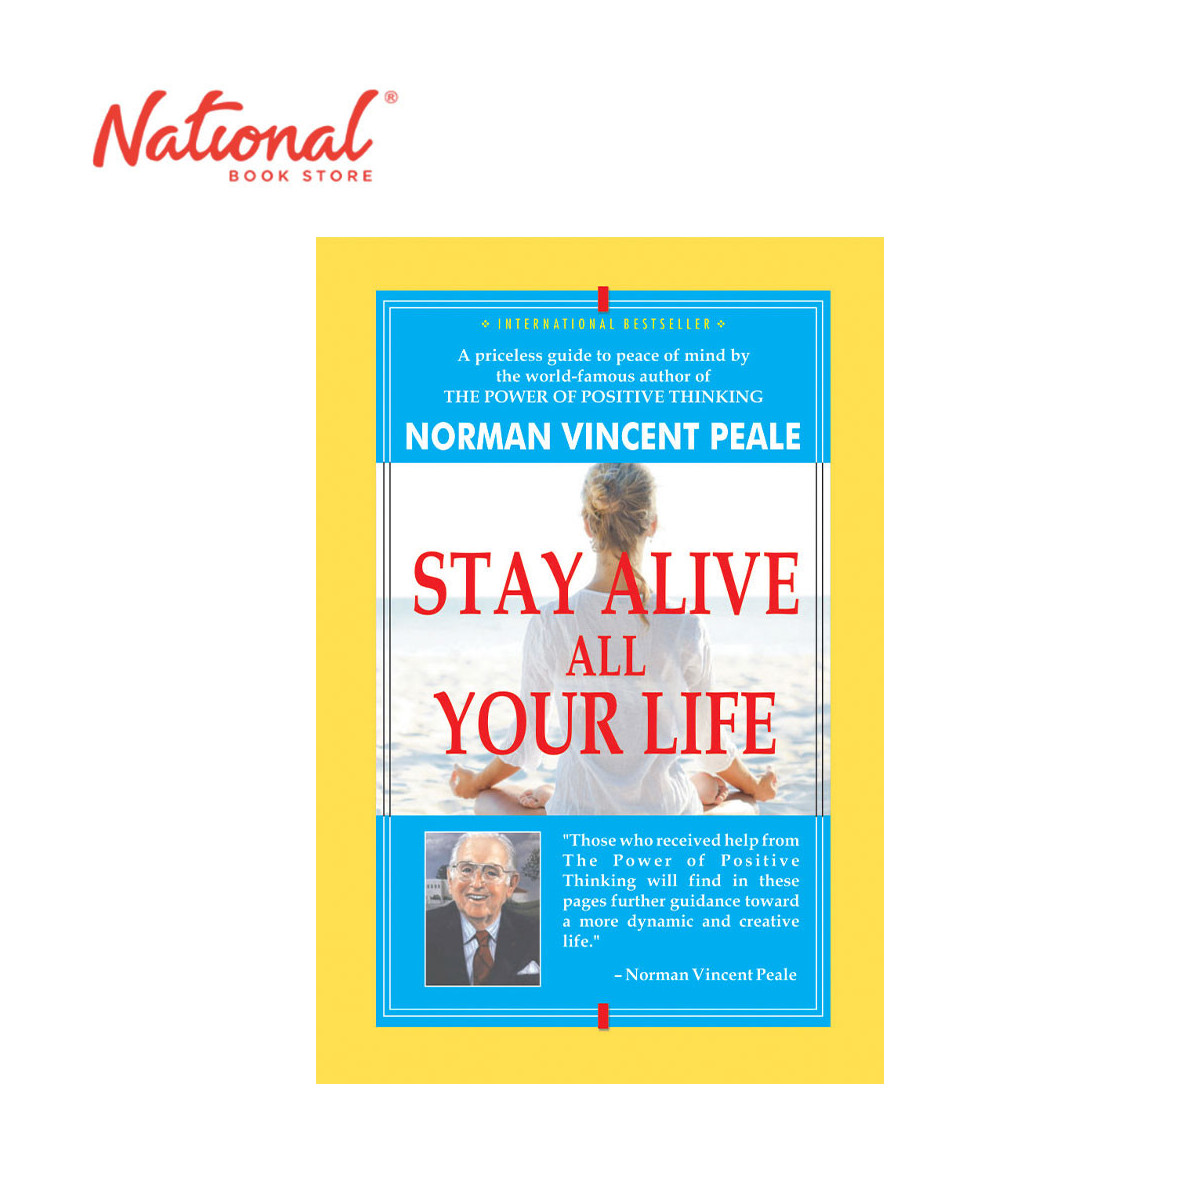 Stay Alive All Your Life by Norman Vincent Peale - Trade Paperback - Self-Help Books